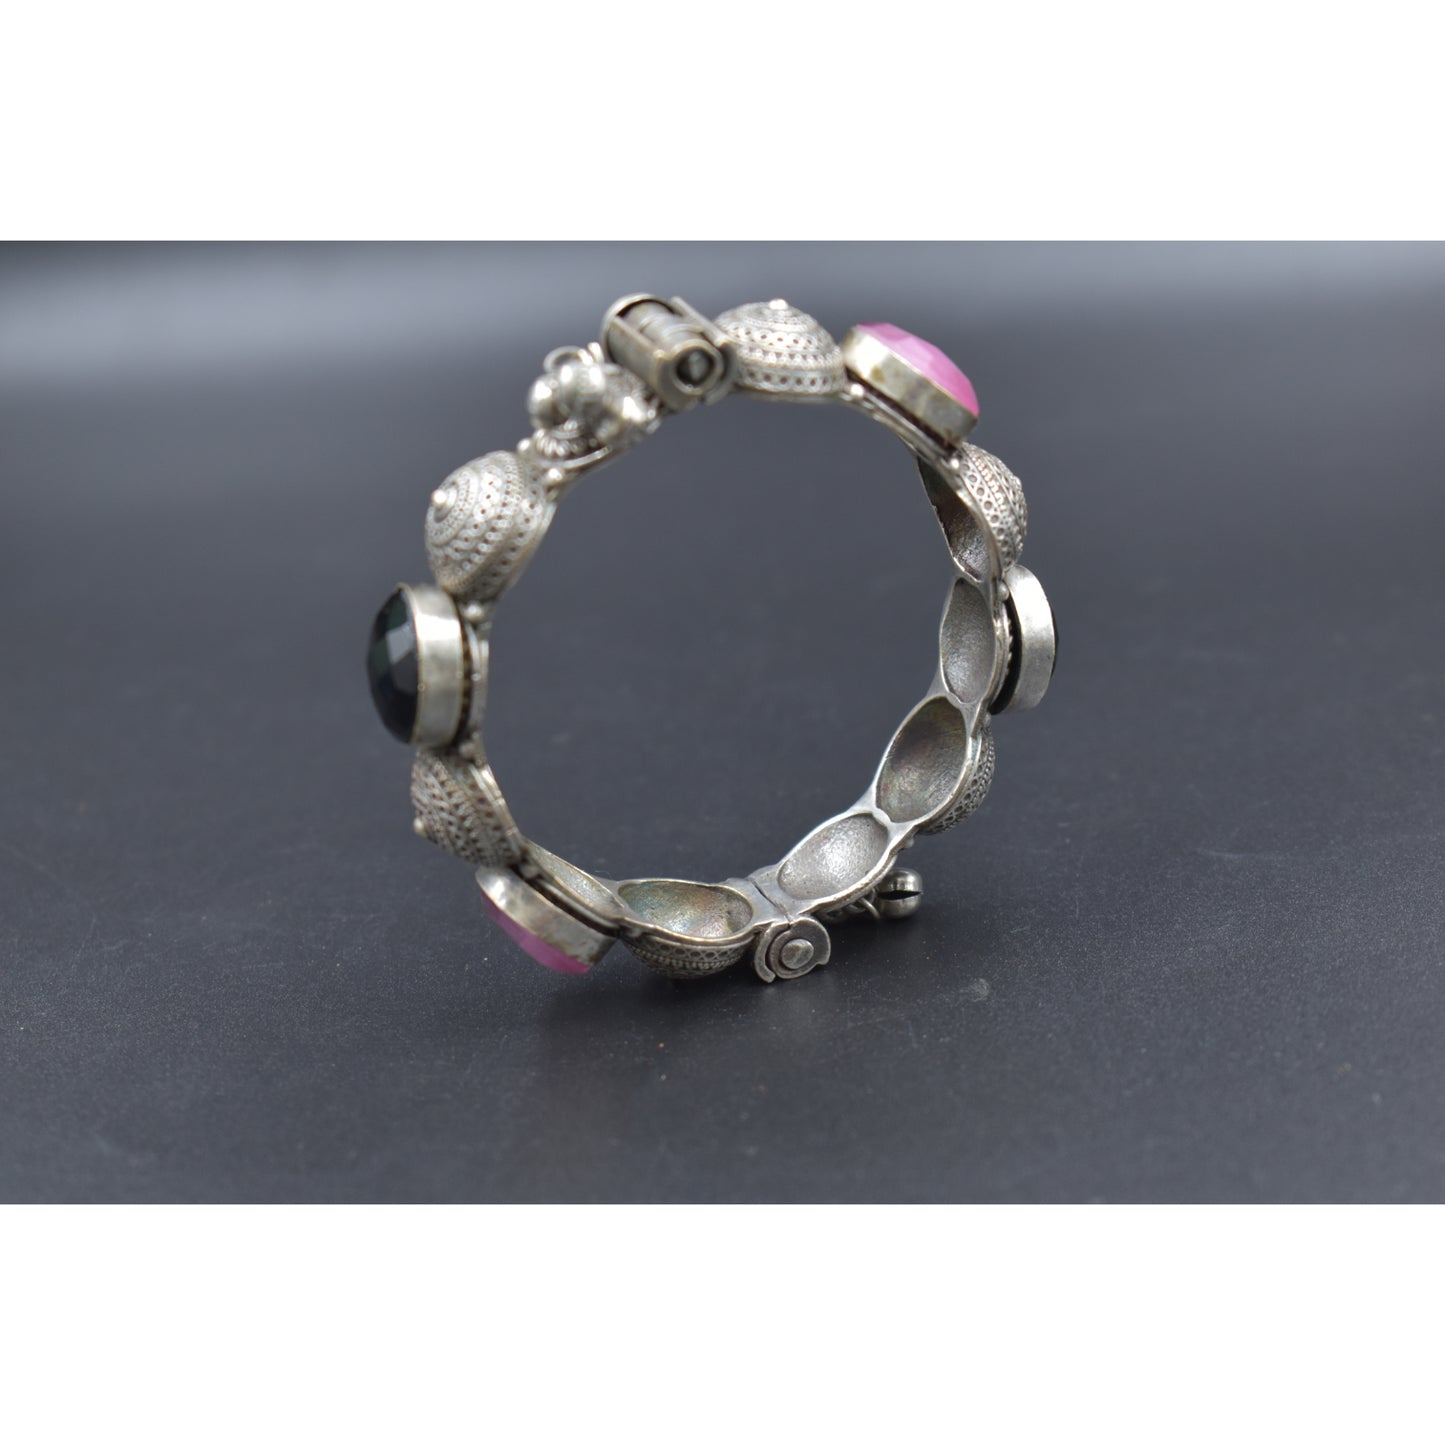 A piece of silver look alike stone bangle